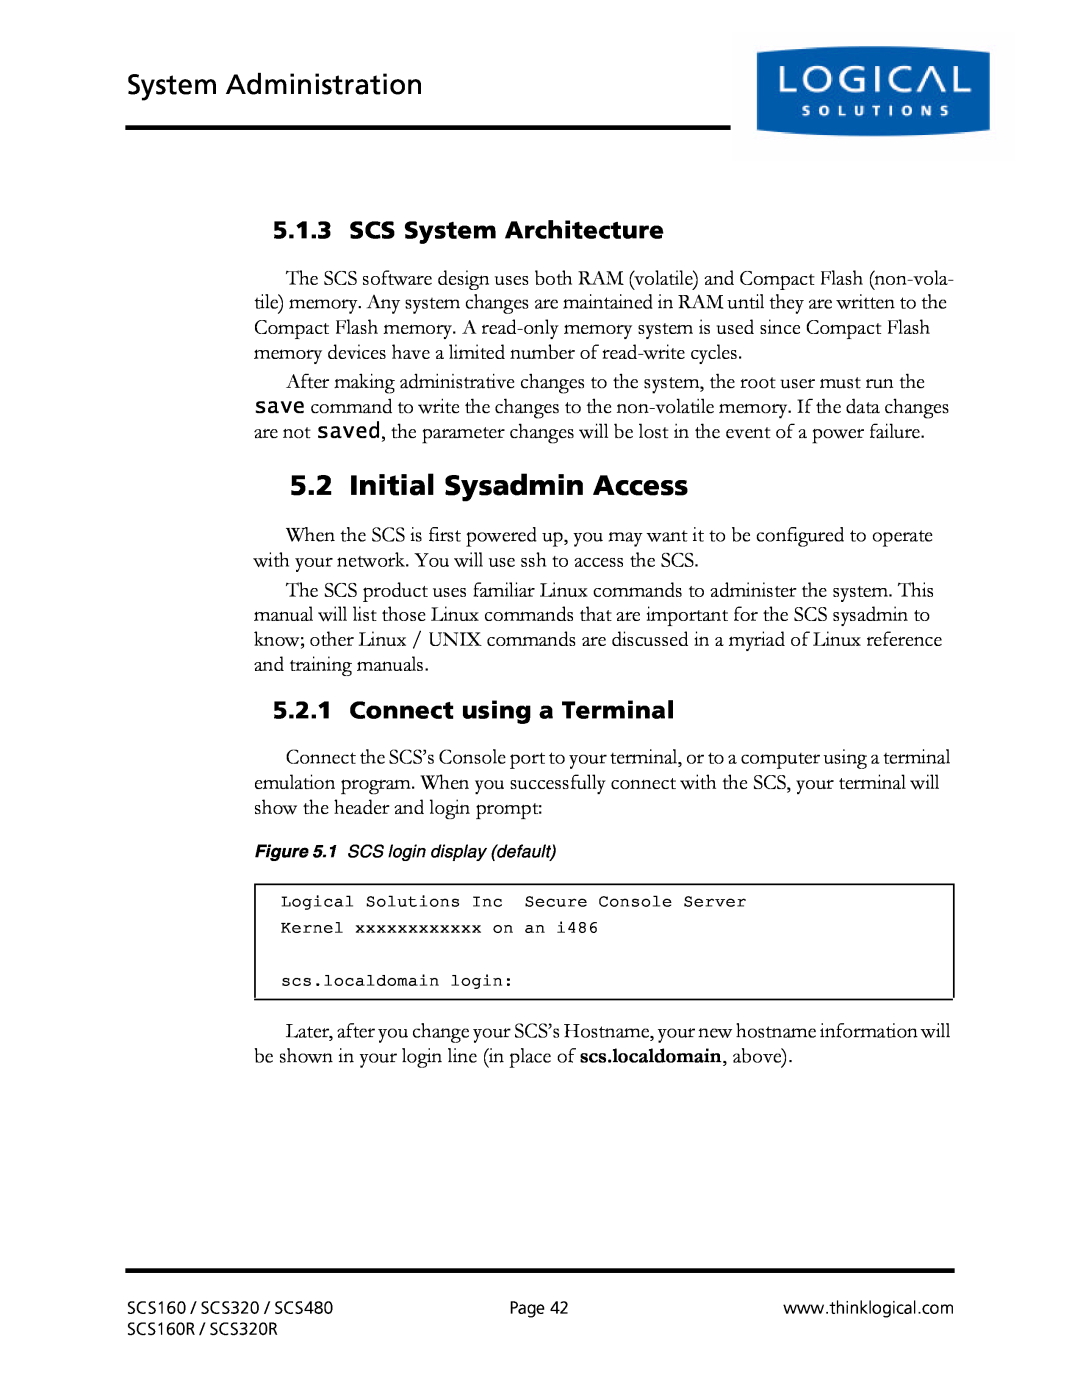 Logical Solutions SCS-R System Administration, Initial Sysadmin Access, SCS System Architecture, Connect using a Terminal 